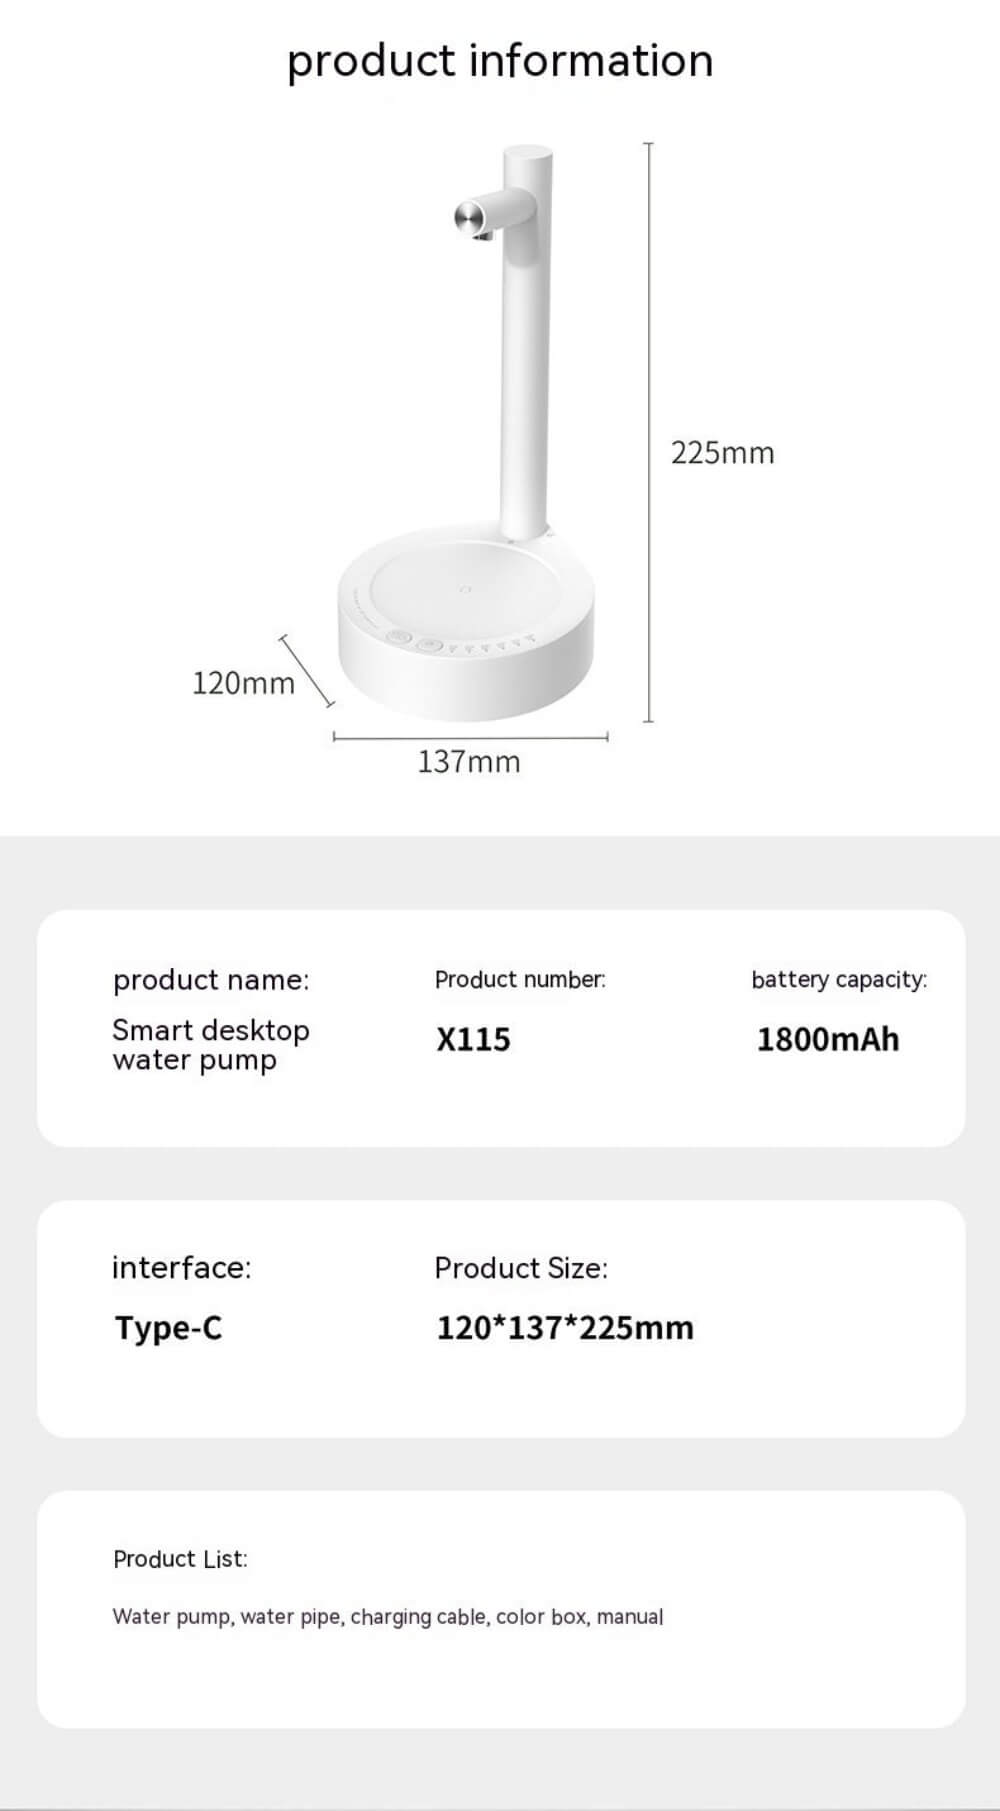 The mini water table dispenser in white, its dimensions and specifications.